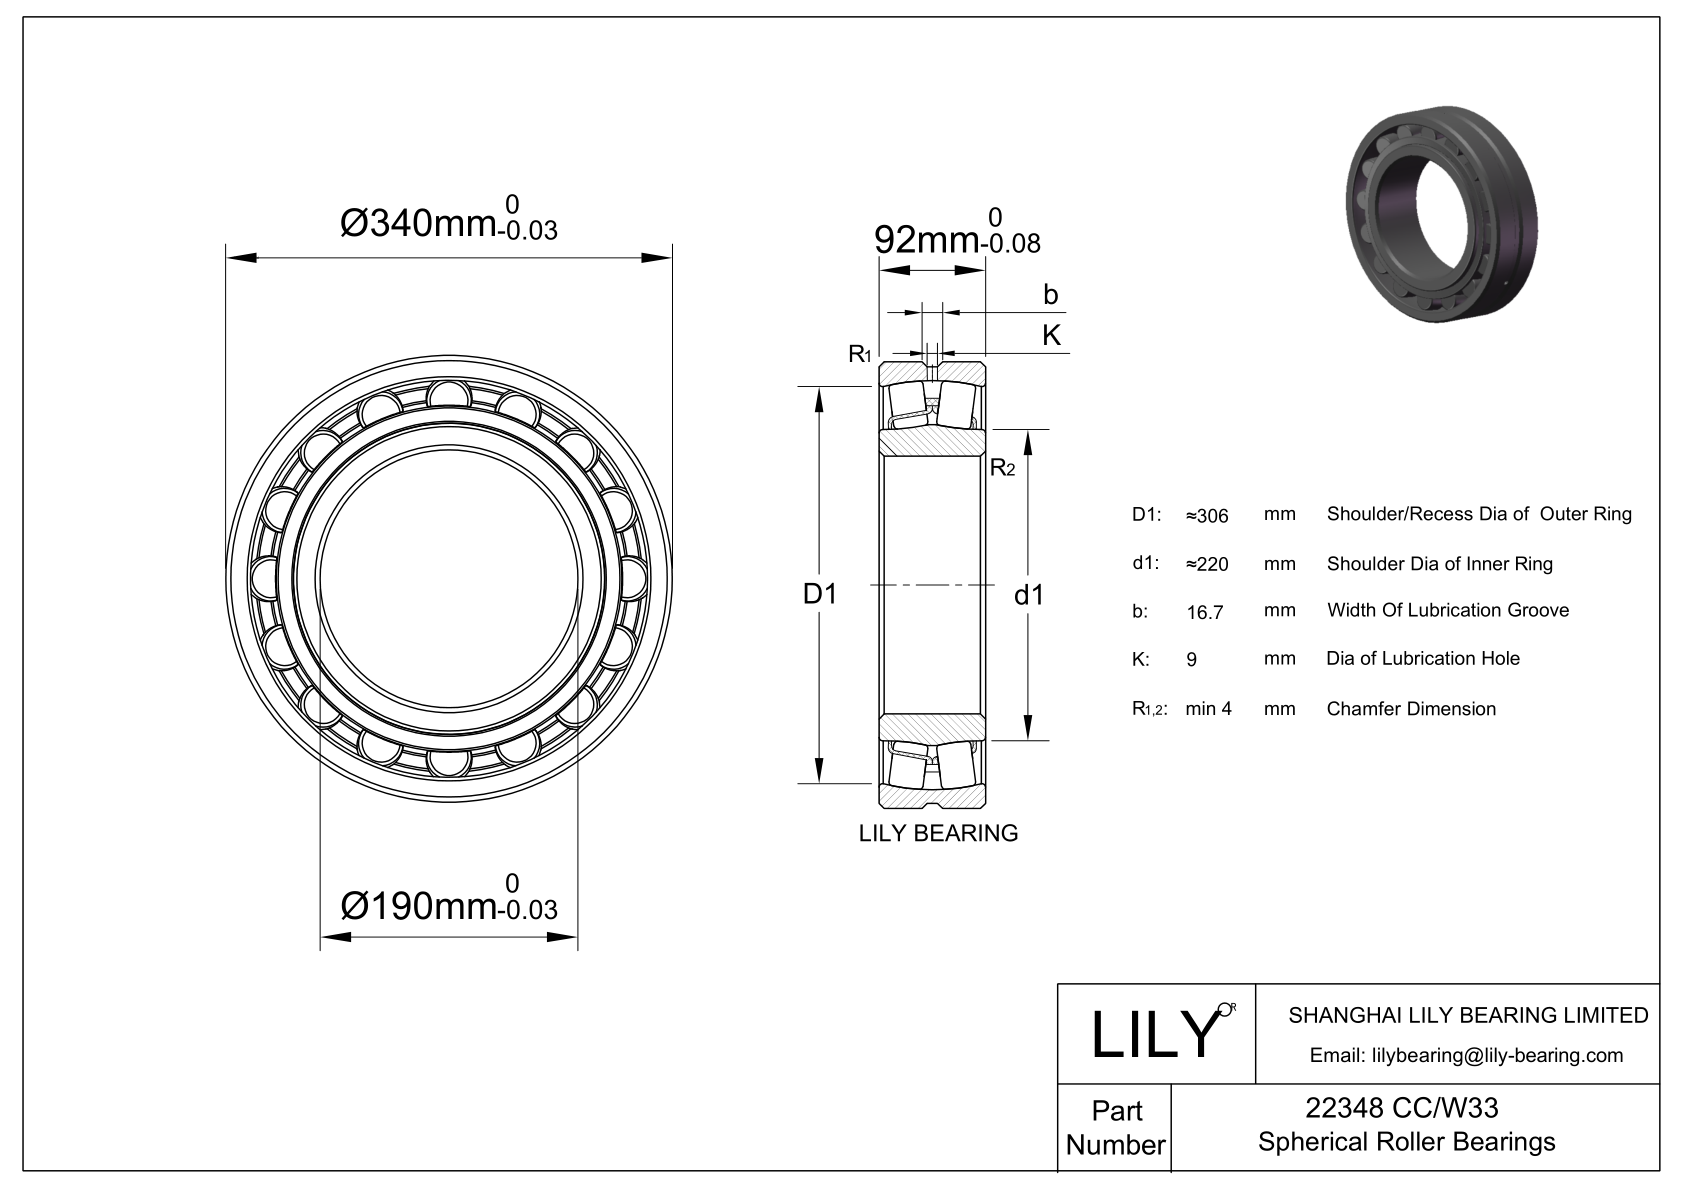 22348 CC/W33 Double Row Spherical Roller Bearing cad drawing